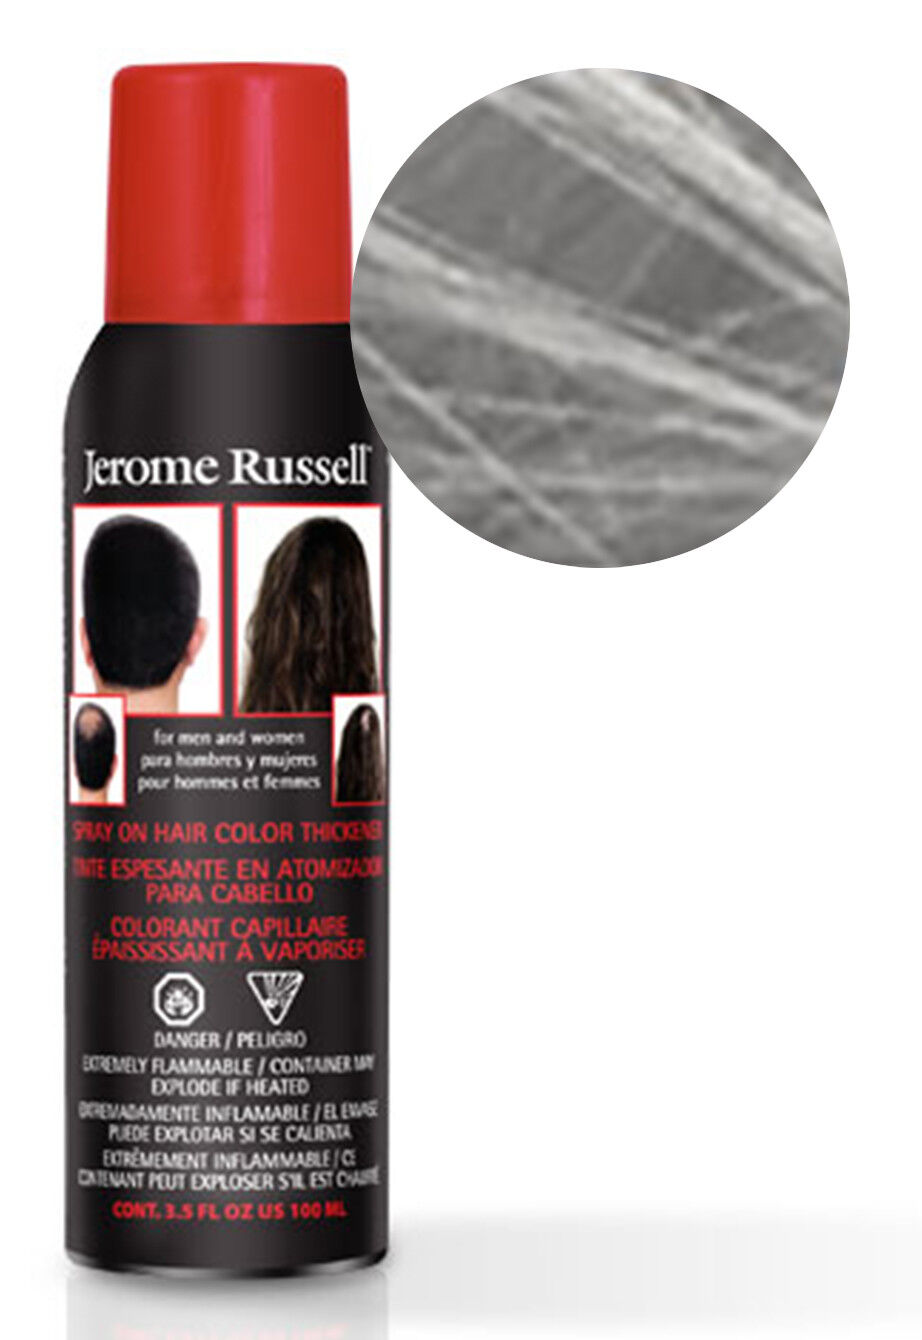 Jerome Russell Spray On Hair Color Thickener 100ml Silver Gray EBay